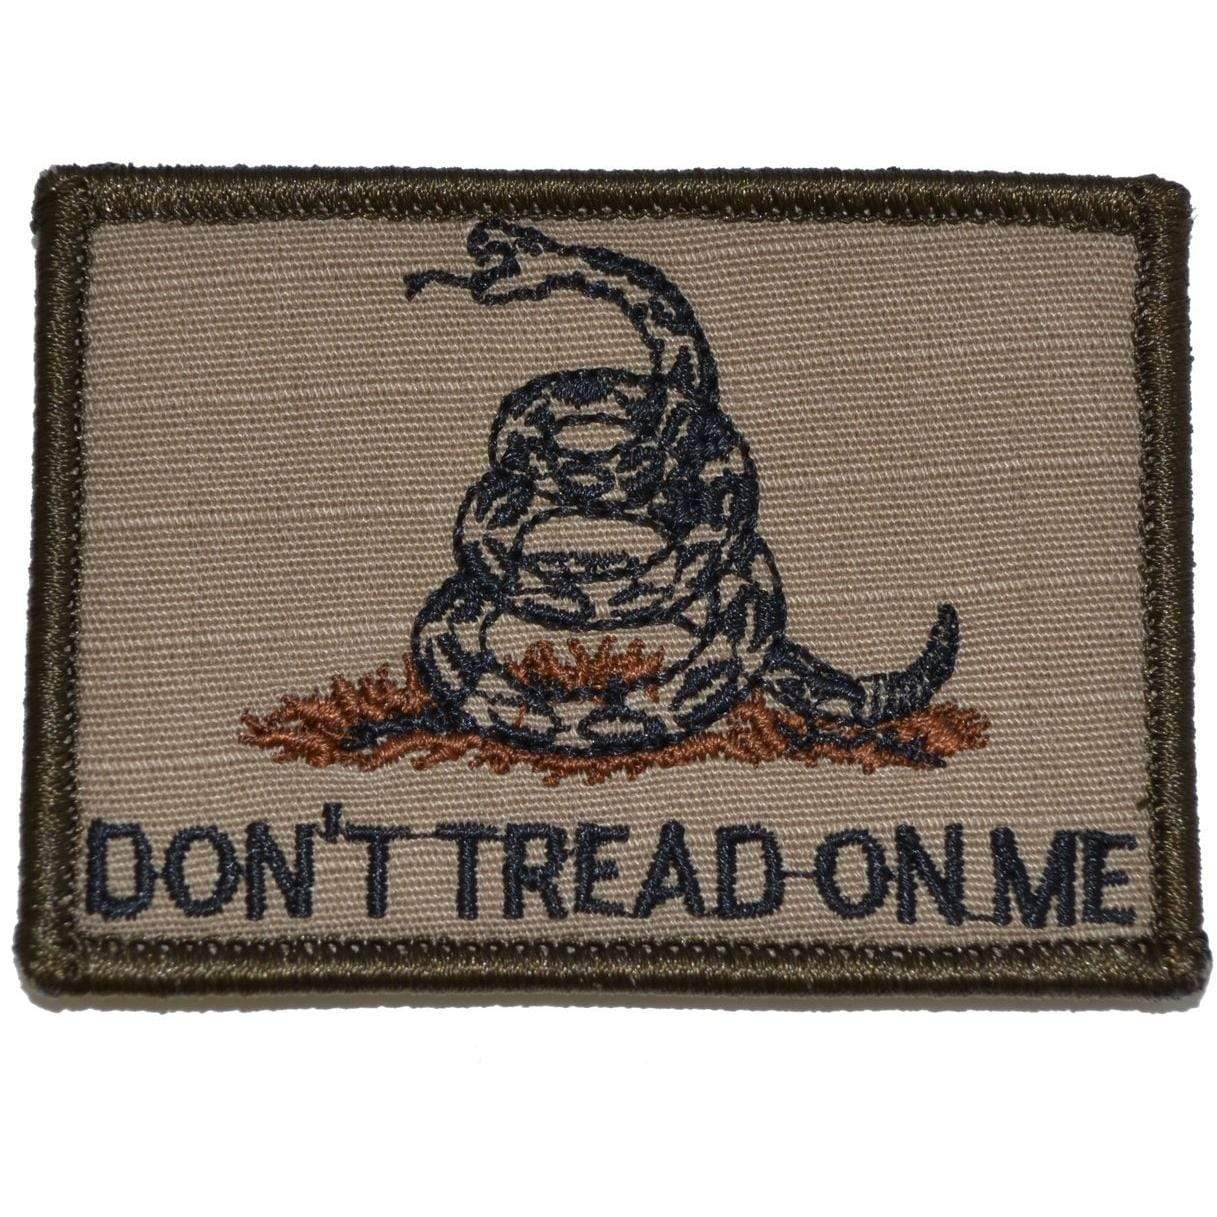 Tactical Gear Junkie Patches Coyote Brown w/ Black Don't Tread on Me Gadsden Snake - 2x3 Patch